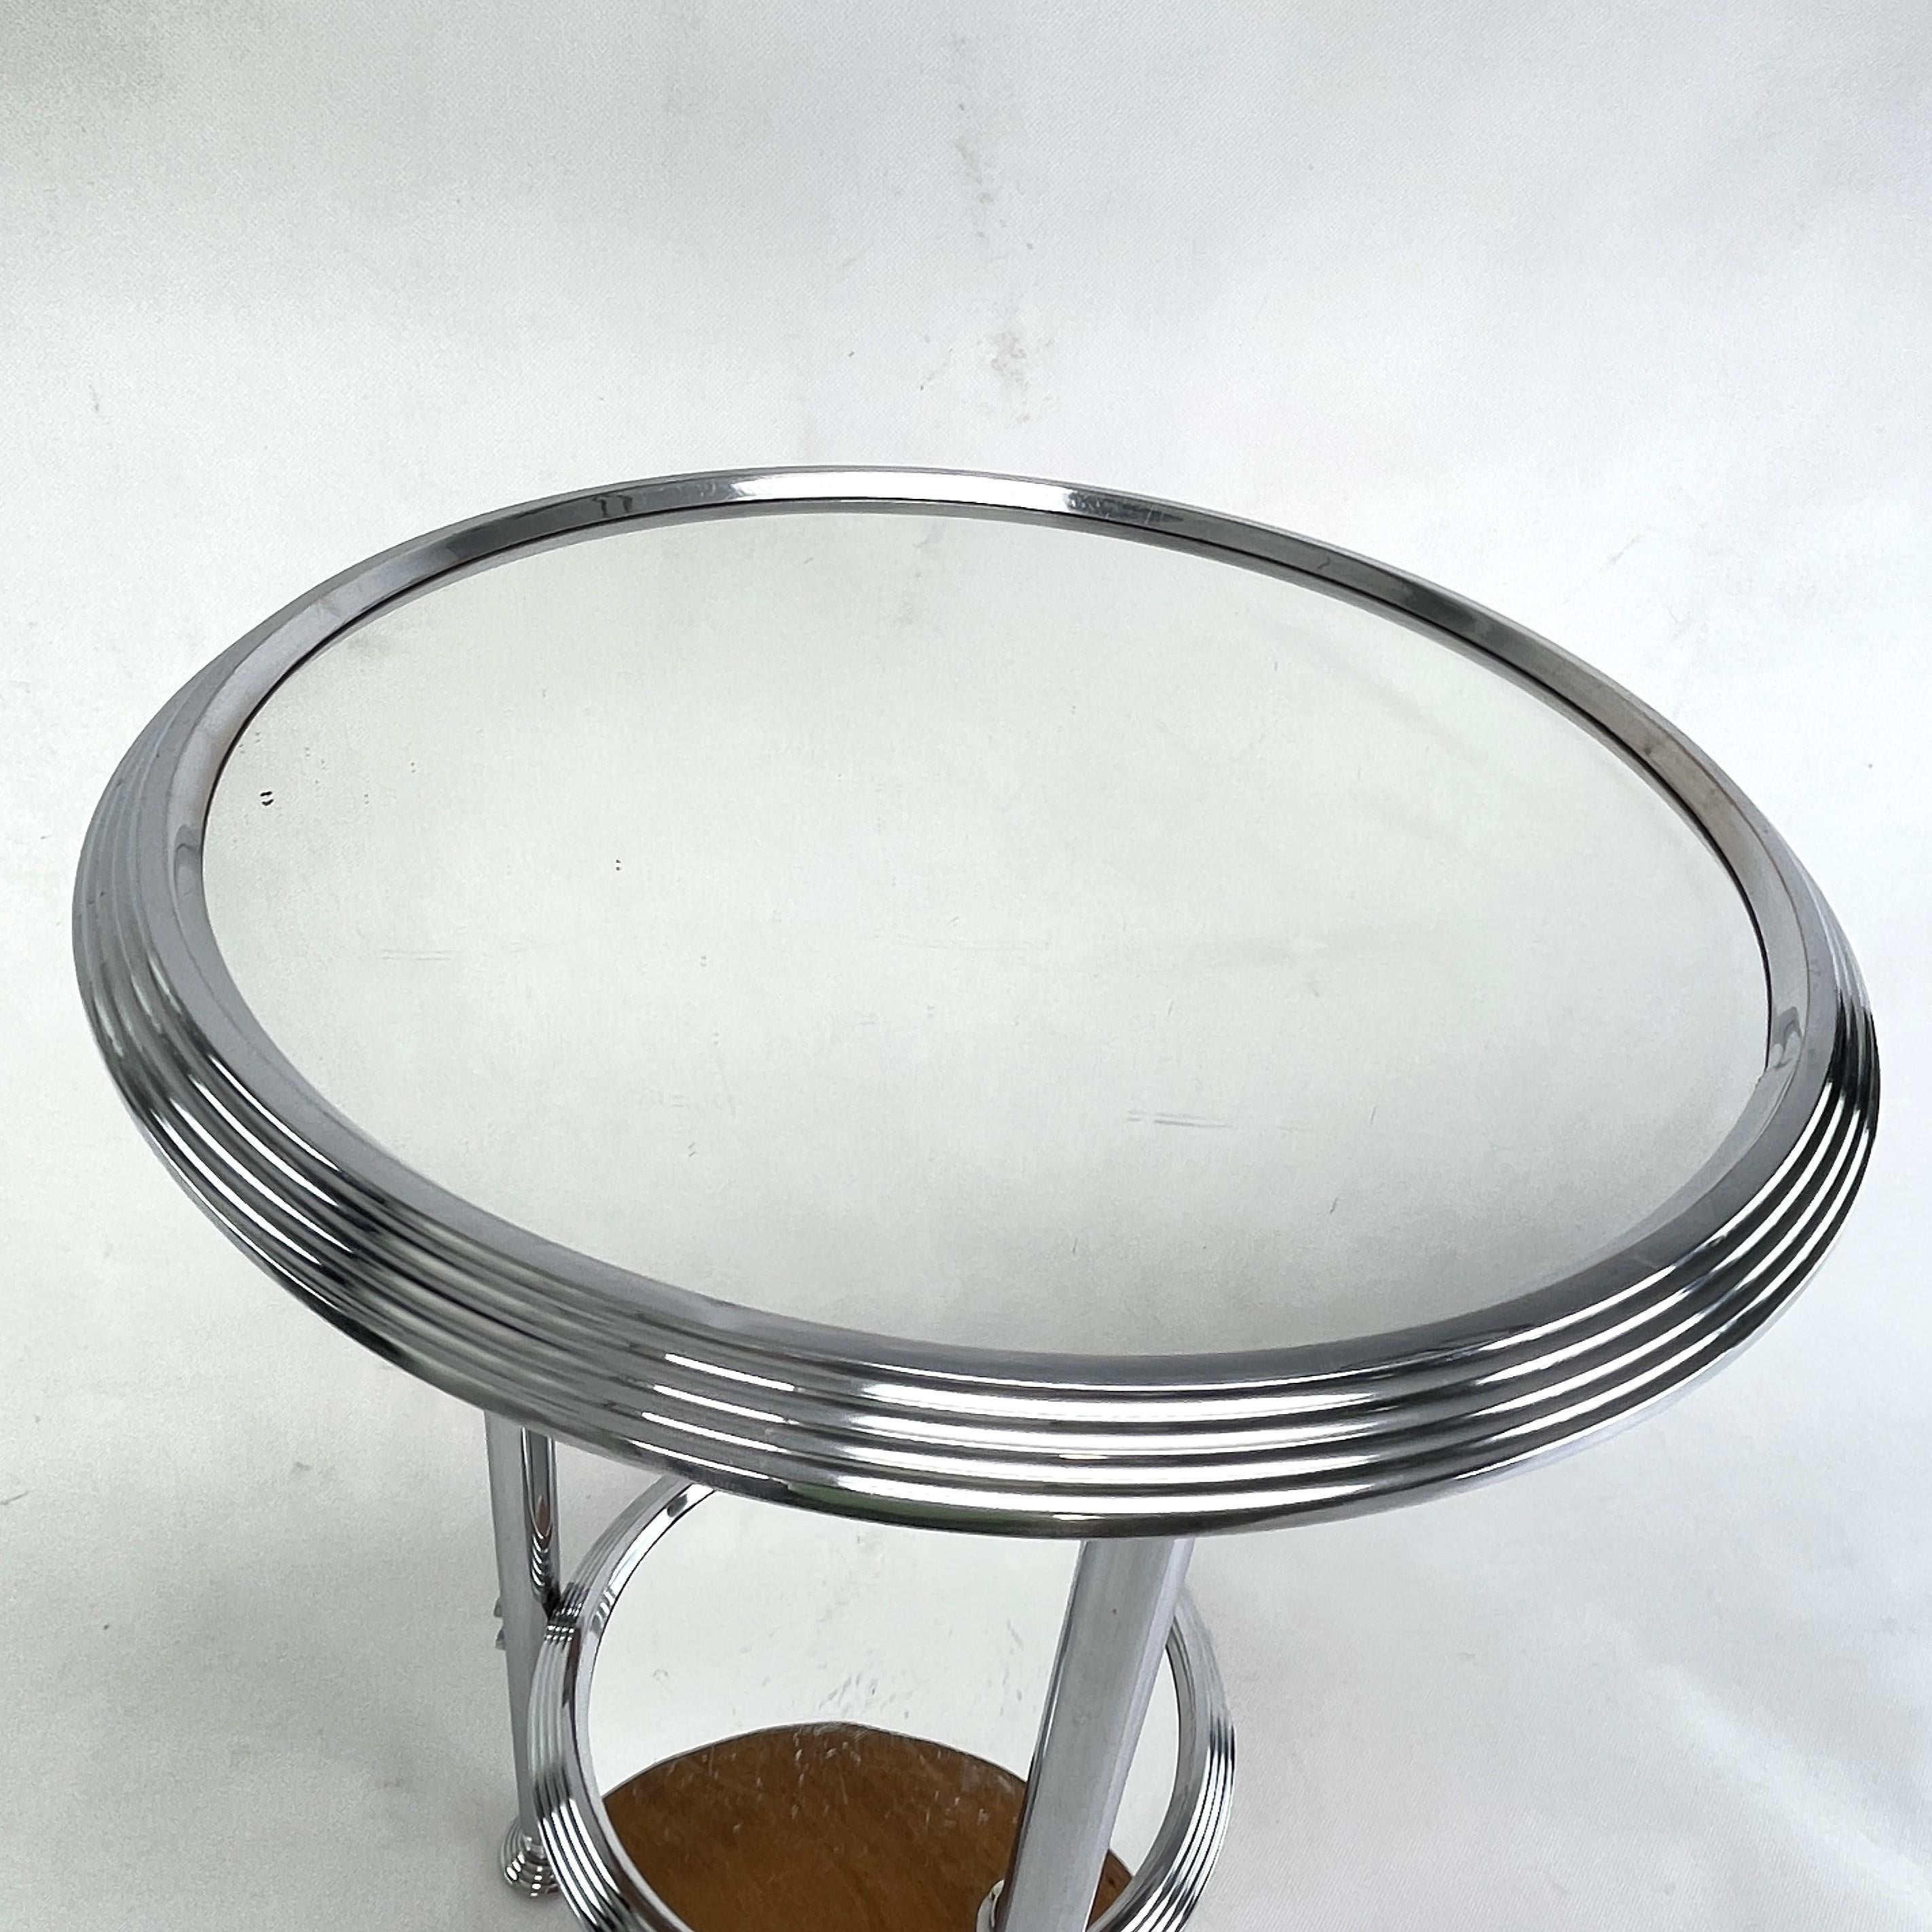 Bauhaus ART DECO chrome side table with mirror surface around, 1930s